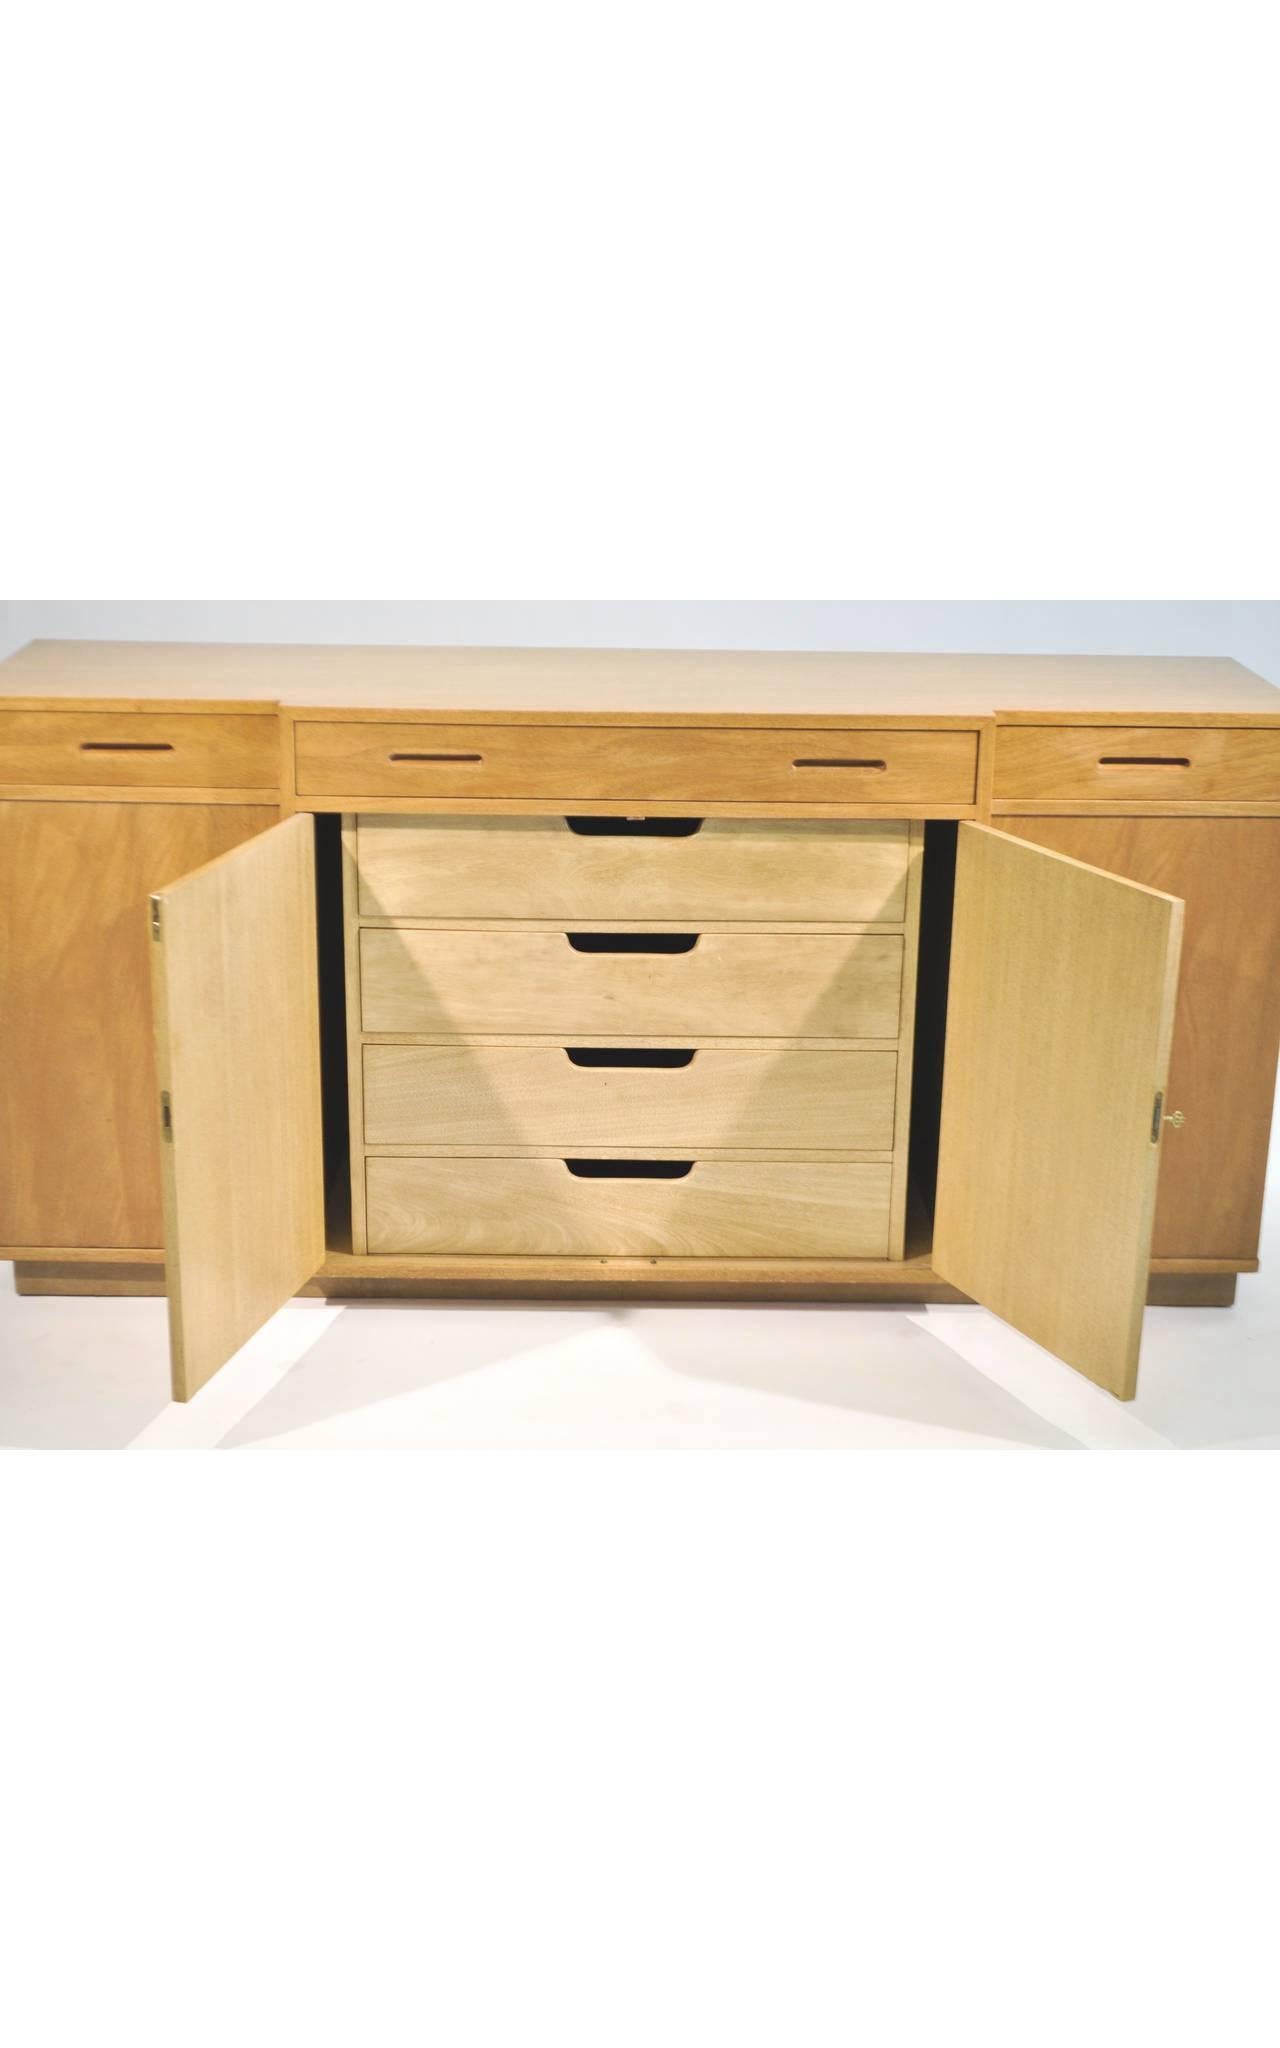 This exceptional sideboard was designed by Edward Wormley for Dunbar's New World Collection. Wormley's modernist design can be characterized as making use of simple surfaces and silhouettes while exemplifying fine woodwork. 

This sideboard is